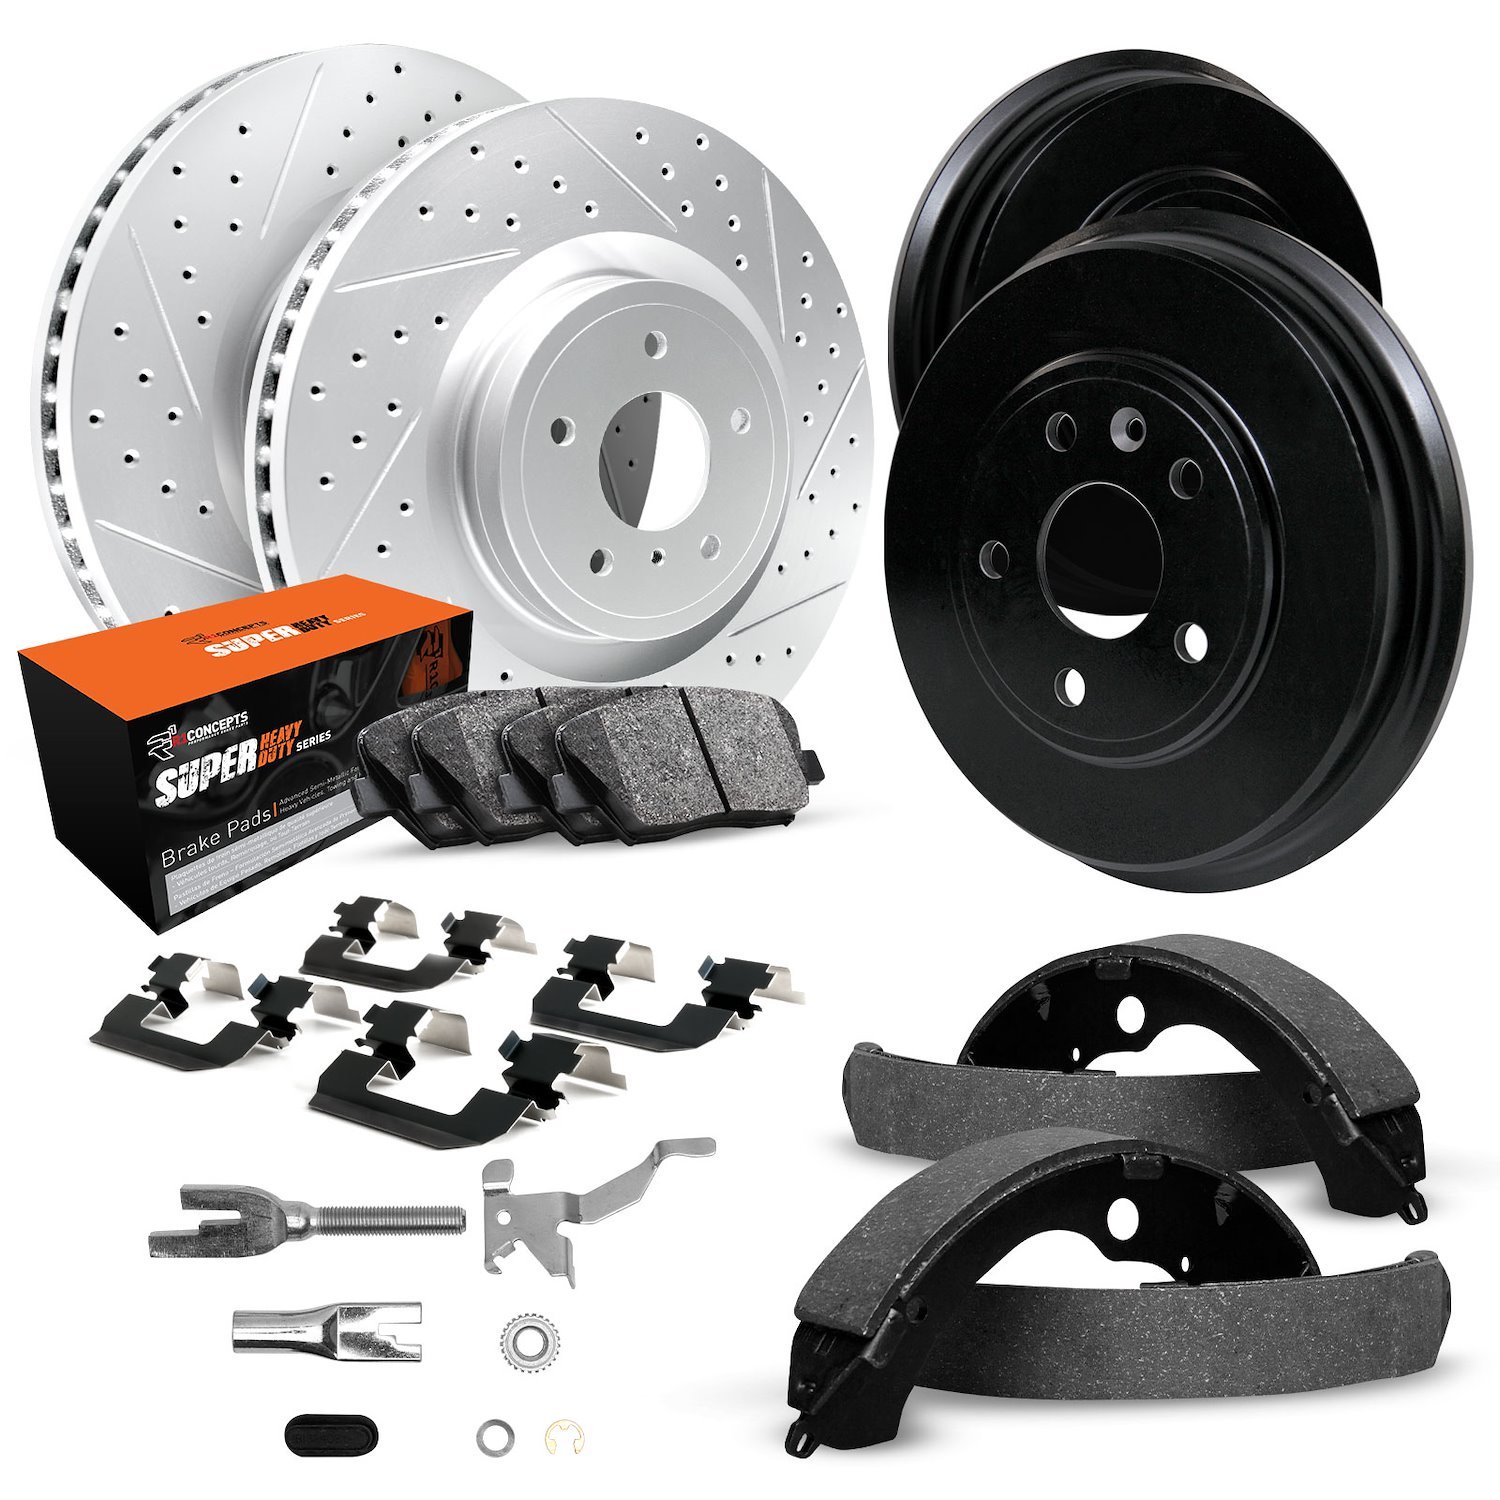 GEO-Carbon Drilled/Slotted Rotors/Drums w/Super-Duty Pads/Shoes/Hardware/Adjusters, 1976-1977 GM, Position: Front/Rear